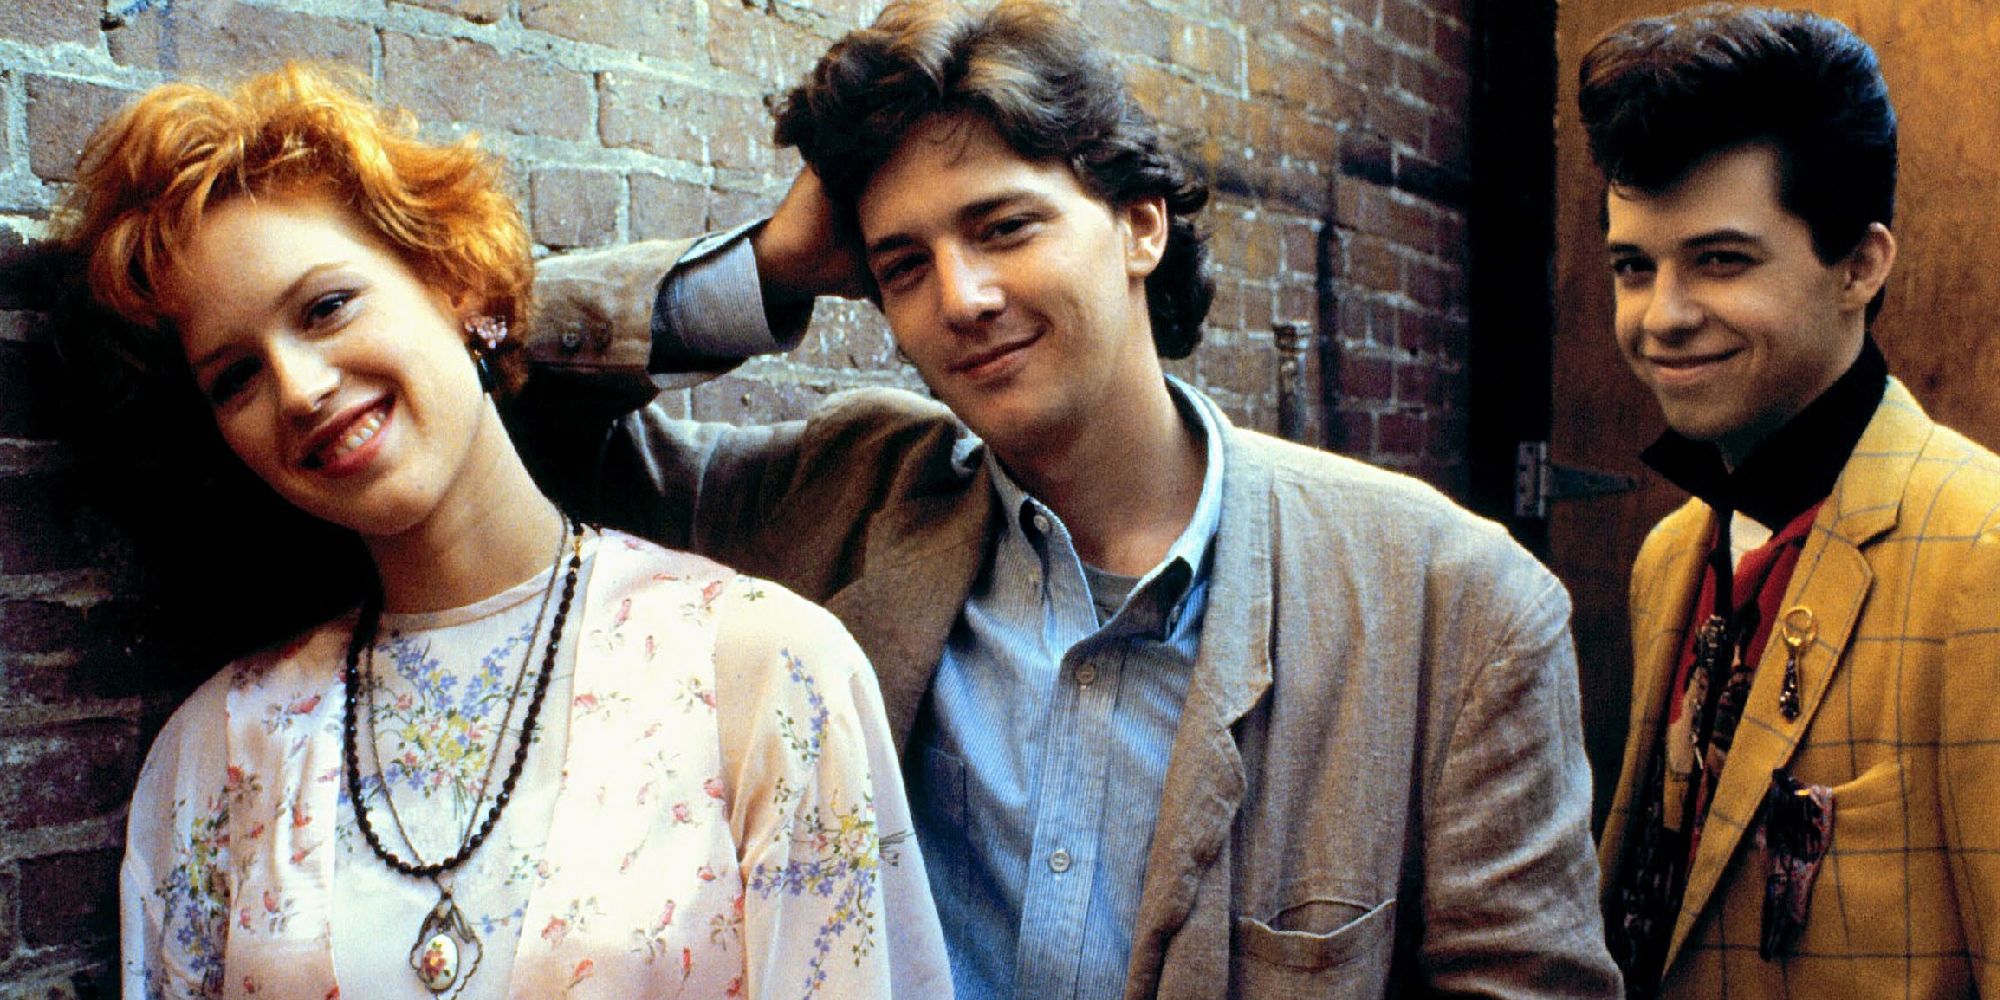 Molly Ringwald, Andrew McCarthy, and Jon Cryer against a brick wall in a promo pic for Pretty in Pink